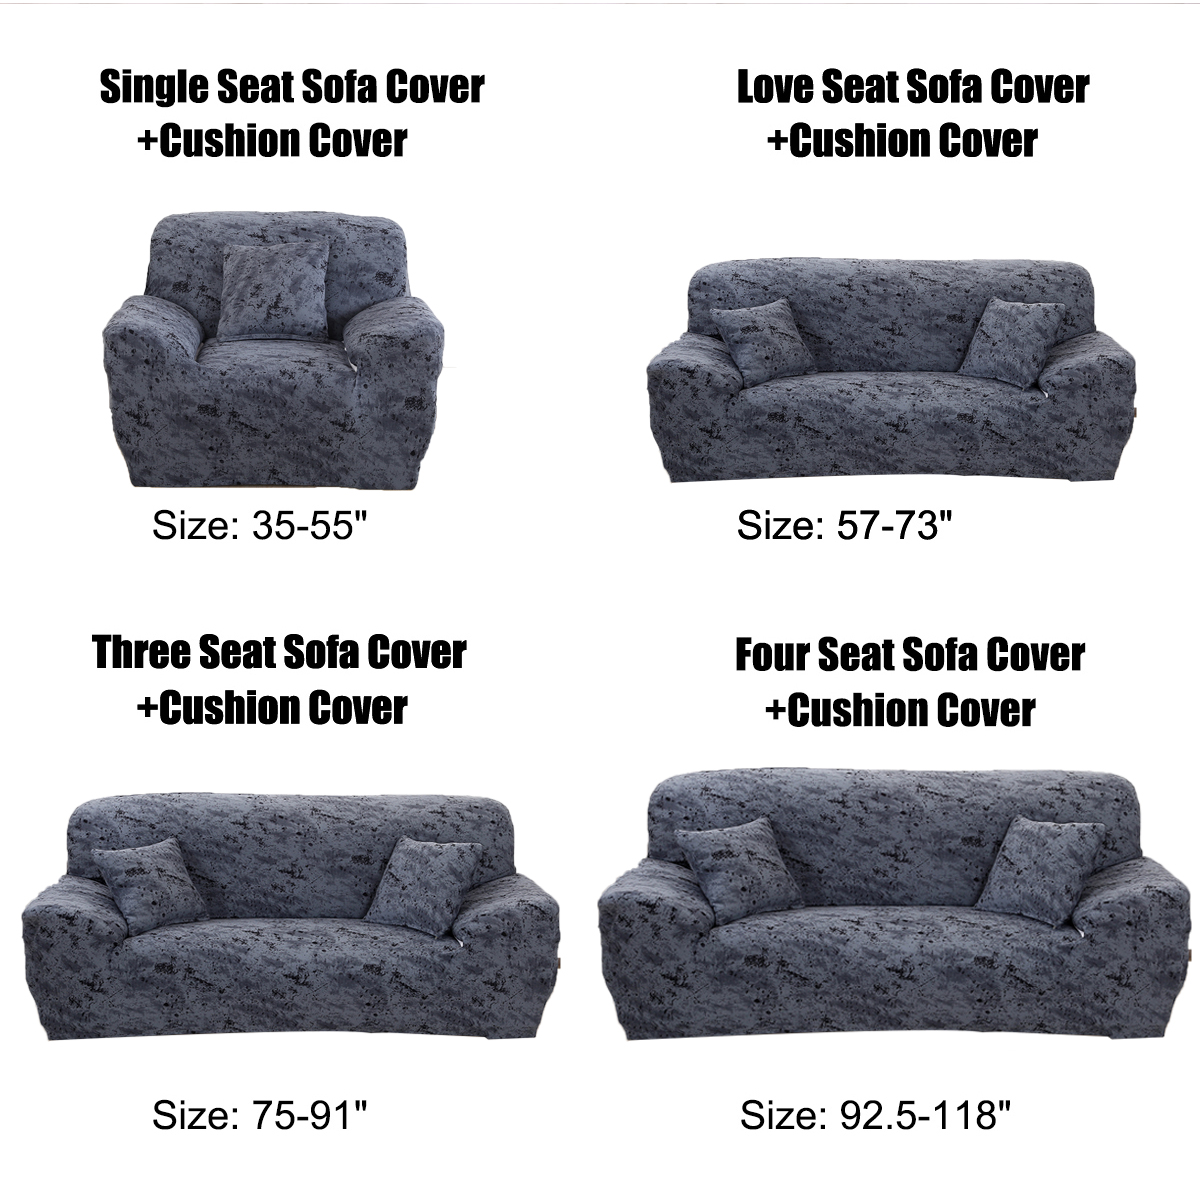 1234-Seater-Universal-Elastic-Stretch-Sofa-Cover-Slipcover-Couch-Washable-Furniture-Protector-1730249-2